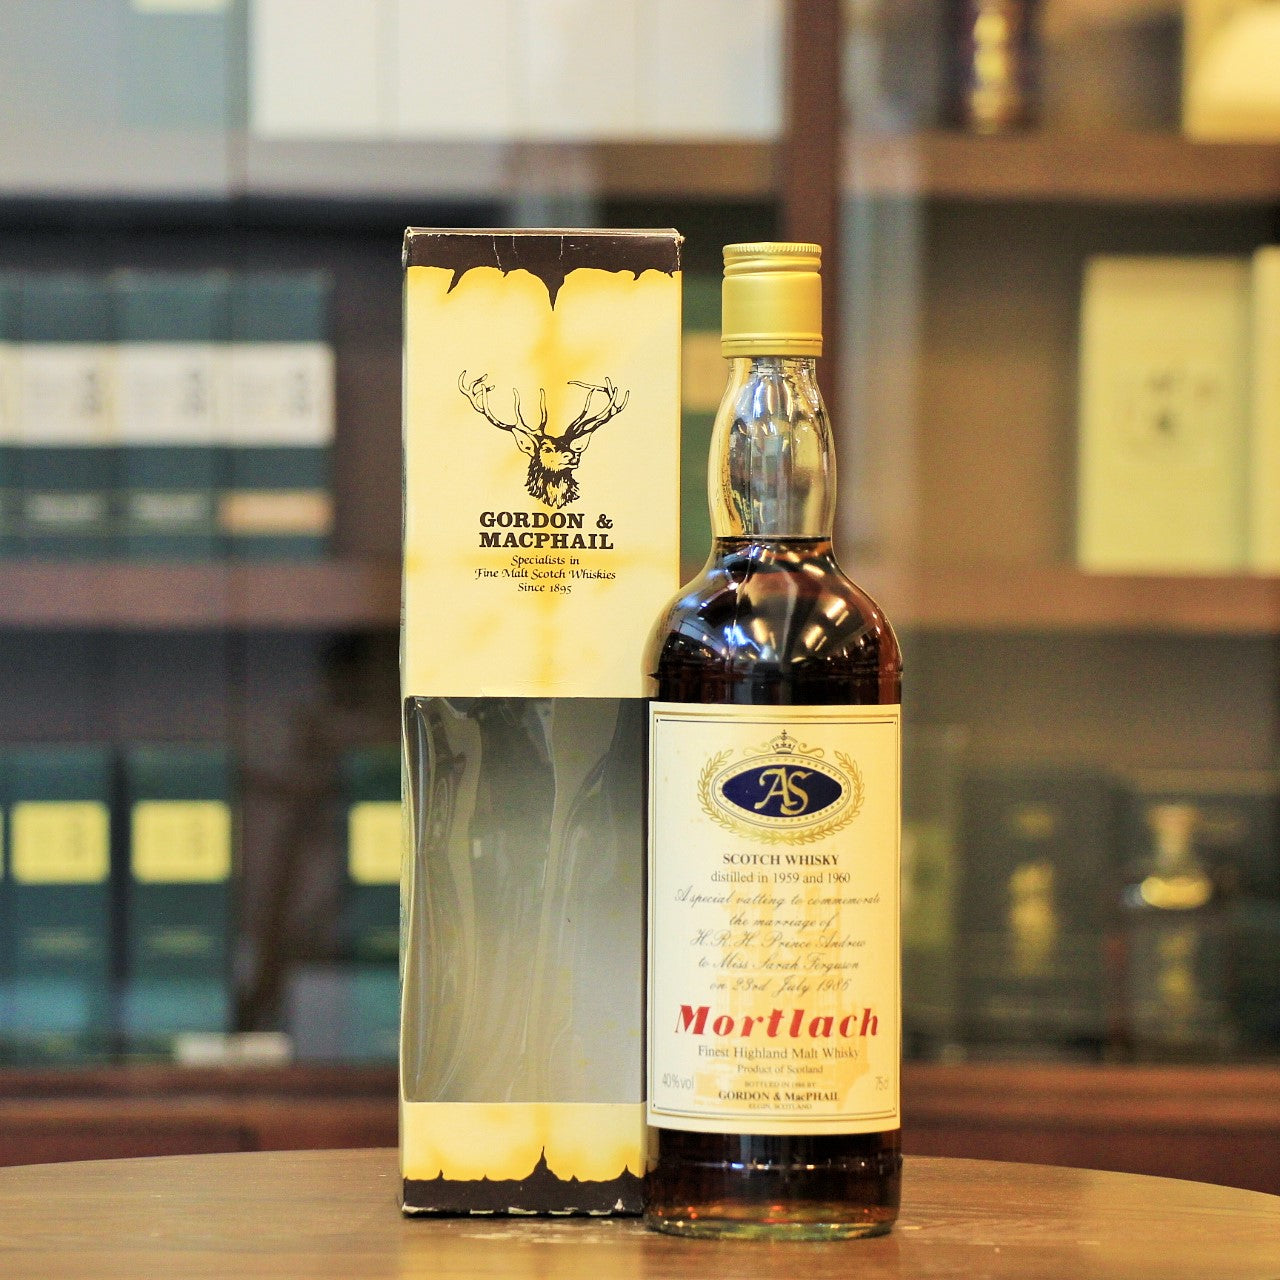 This Speyside single malt from Mortlach distillery was specailly bottled by Gordon & MacPhail to commemorate the Royal Marriage of H.R.H Prince Andrew and Sarah Ferguson on 23rd July 1986. A marriaged distillation year in 1959 and 1960 represented the birth year of Prince Andrew and Sarah Ferguson.  This is one of Royal Series(Prince Andrew and Sarah Ferguson) 6 special bottlings.